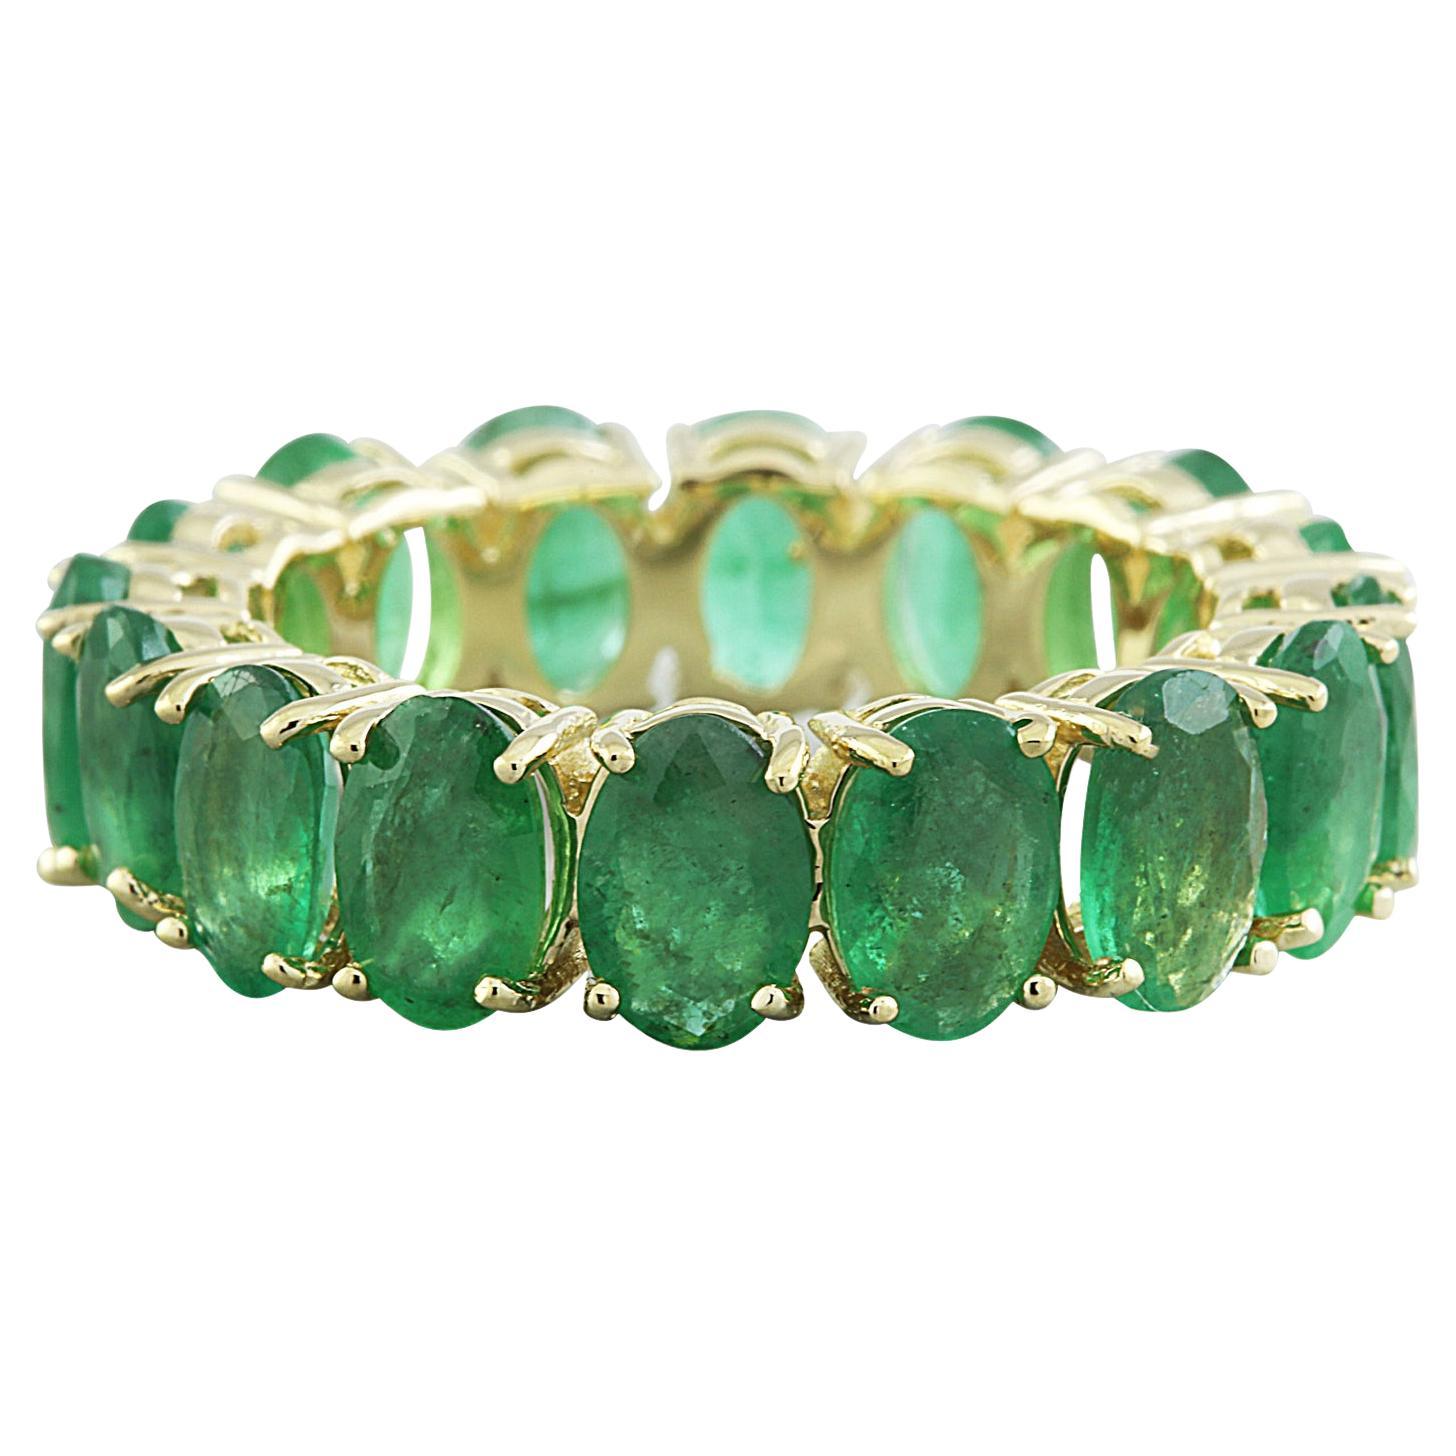 Radiant Emerald Eternity Ring: Timeless Beauty in 14K Solid Yellow Gold im Angebot